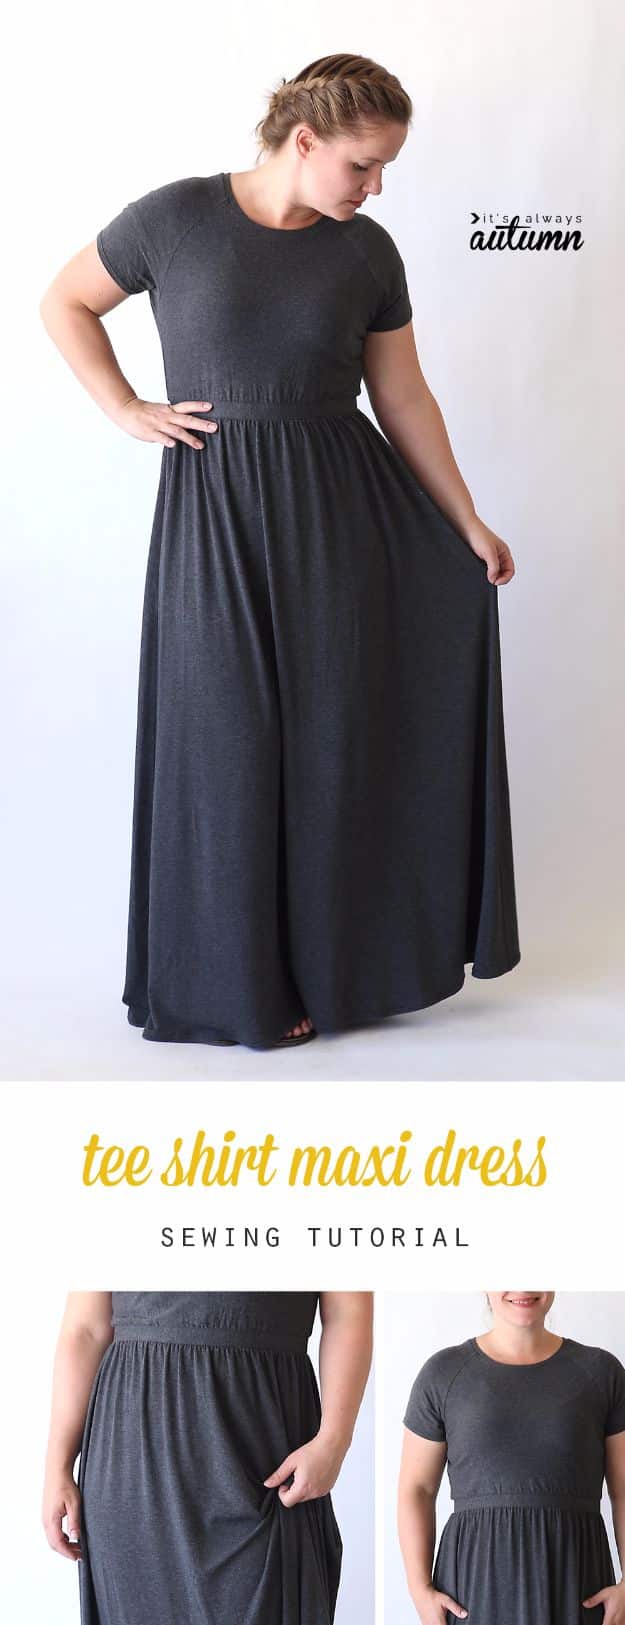 DIY Fashion for Spring - Raglan Tee Maxi Dress - Easy Homemade Clothing Tutorials and Things To Make To Wear - Cute Patterns and Projects for Women to Make, T-Shirts, Skirts, Dresses, Shorts and Ideas for Jeans and Pants - Tops, Tanks and Tees With Free Tutorial Ideas and Instructions http://diyjoy.com/fashion-for-spring